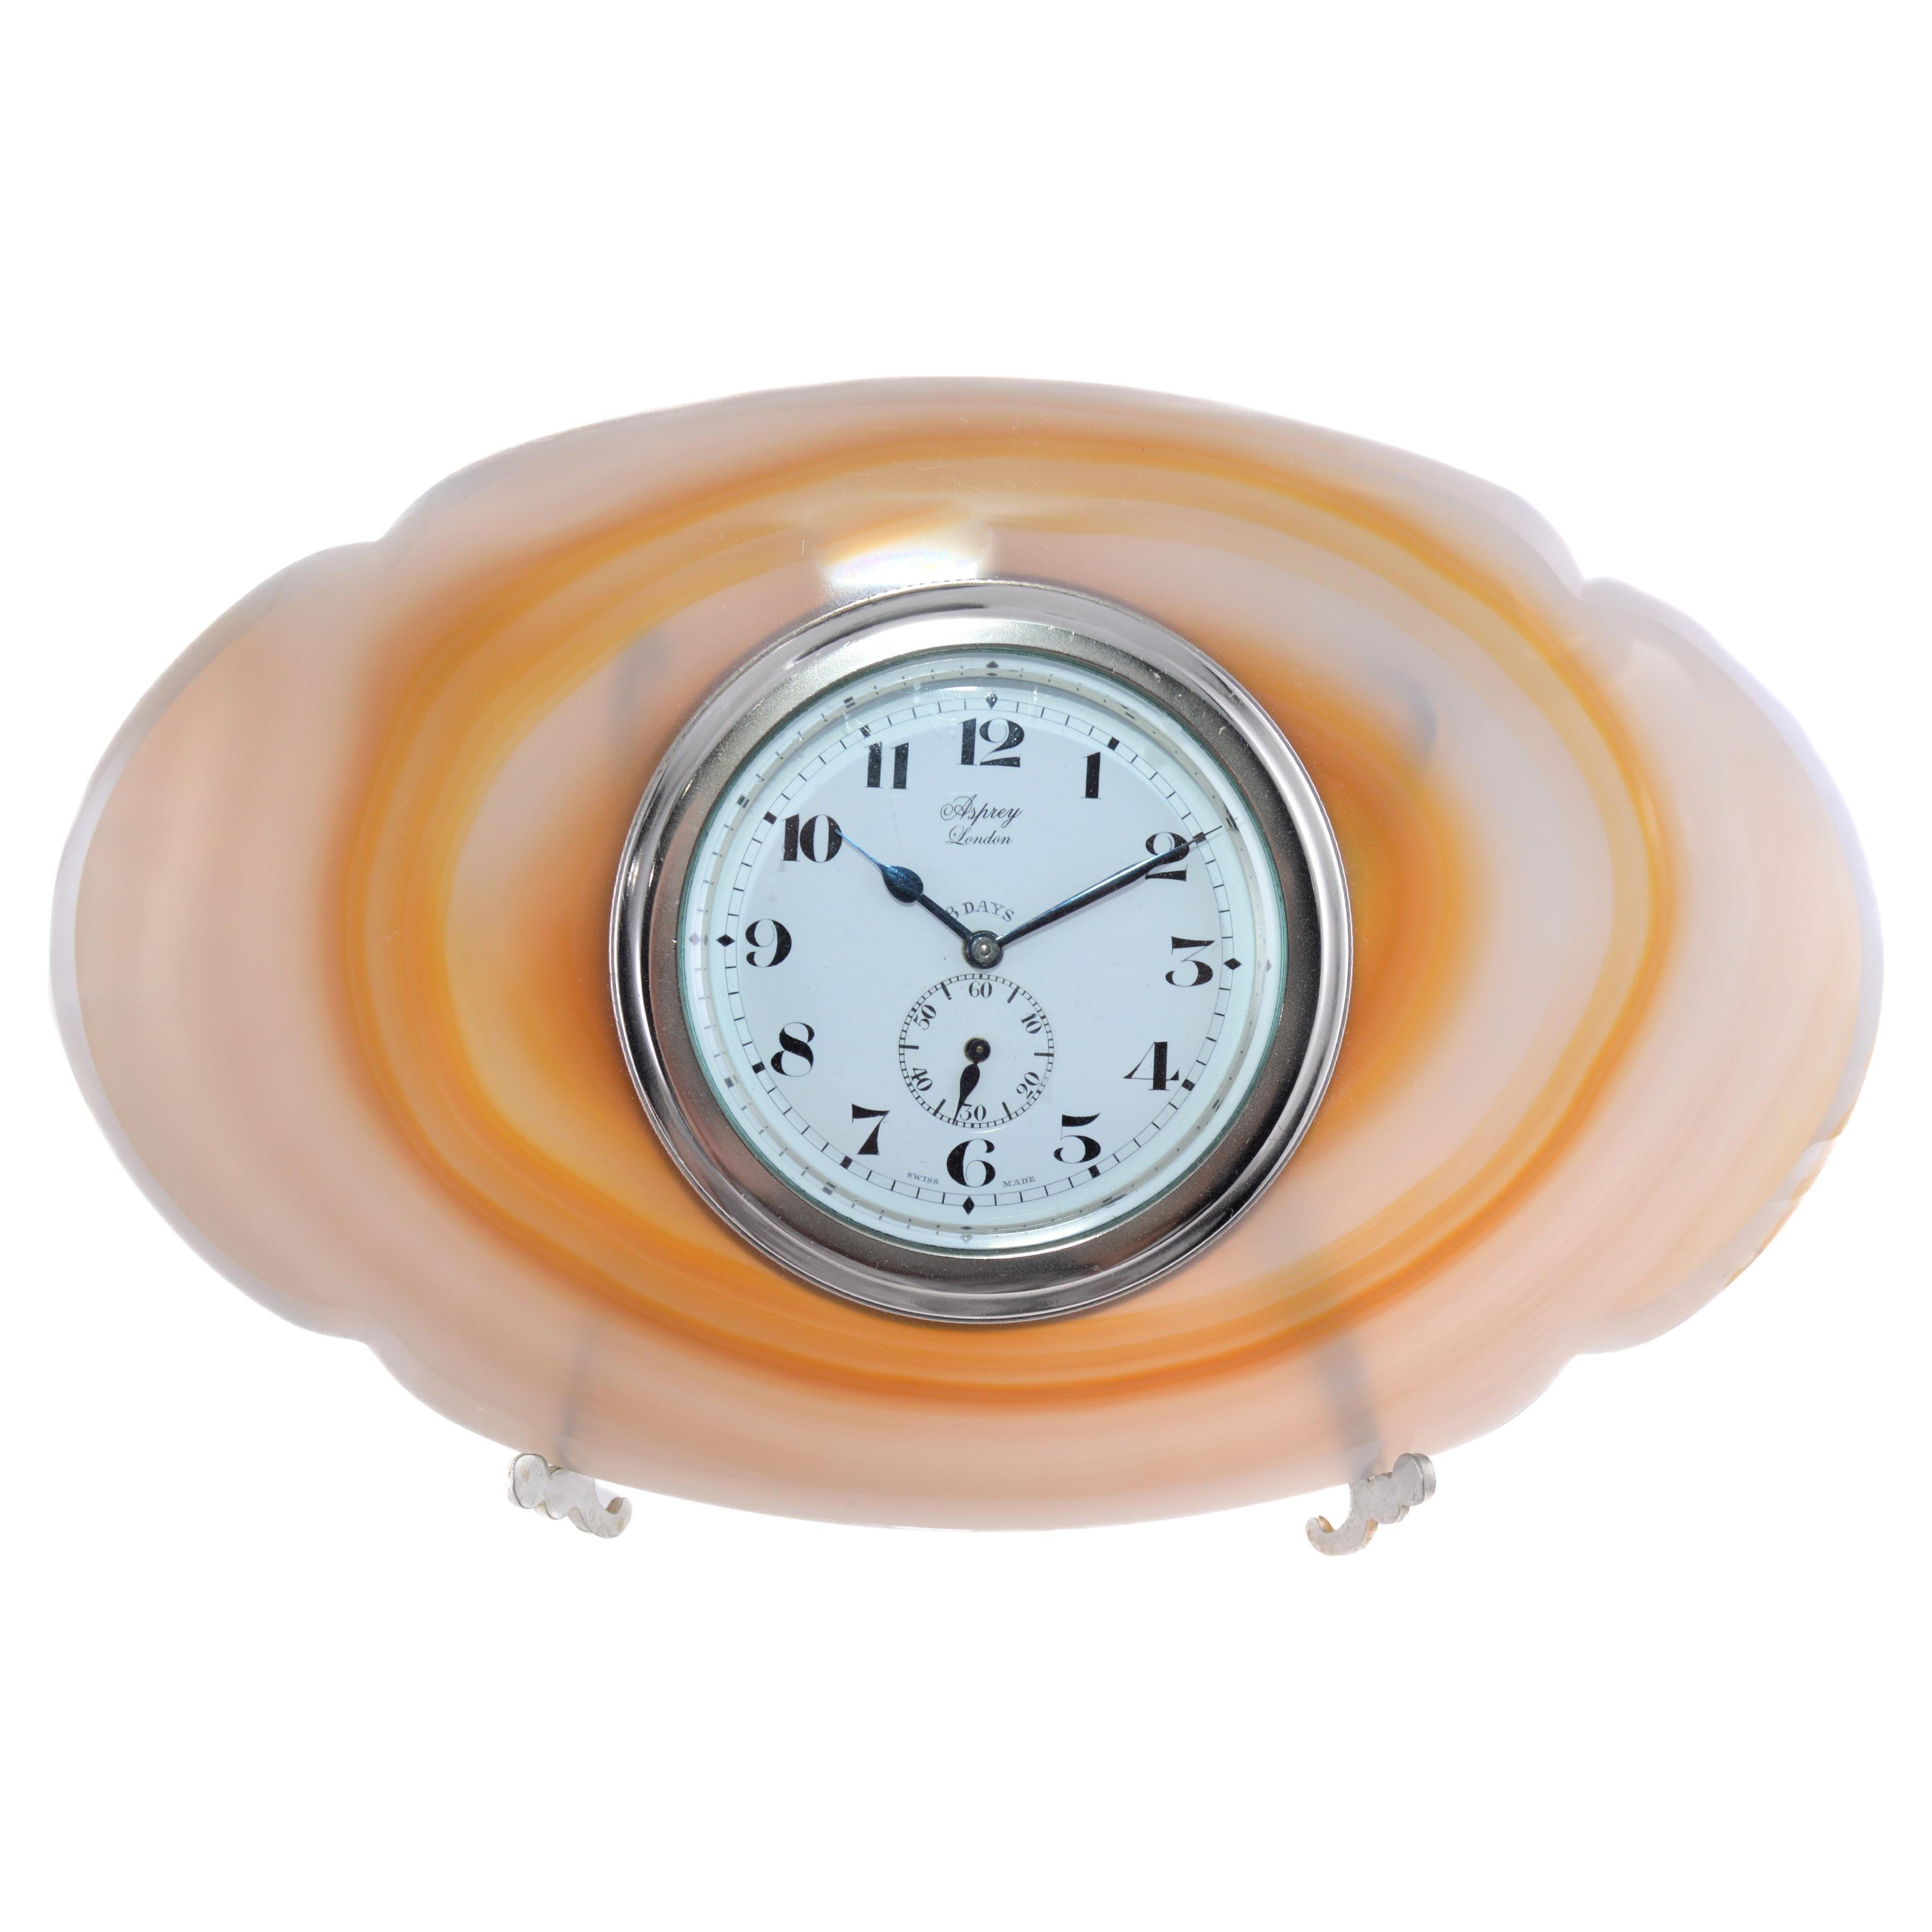 Asprey London, Art Deco Agate Stone Desk Clock One of One 1930's In Excellent Condition For Sale In Long Beach, CA